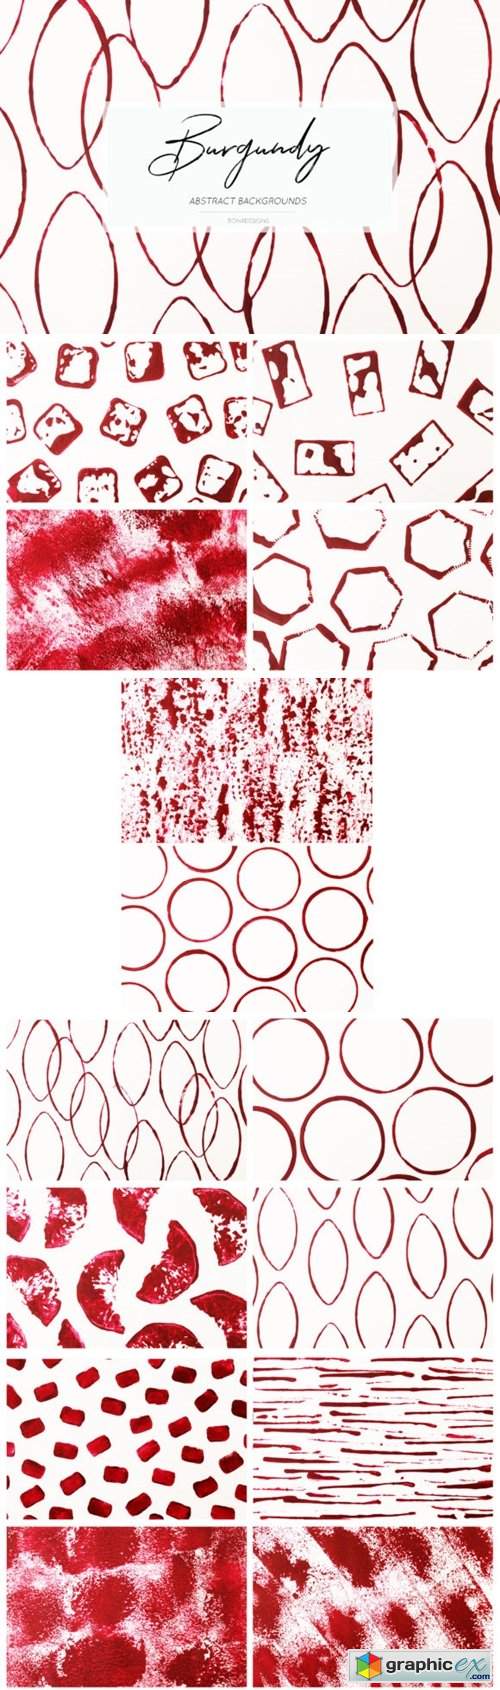 Burgundy Abstract Backgrounds